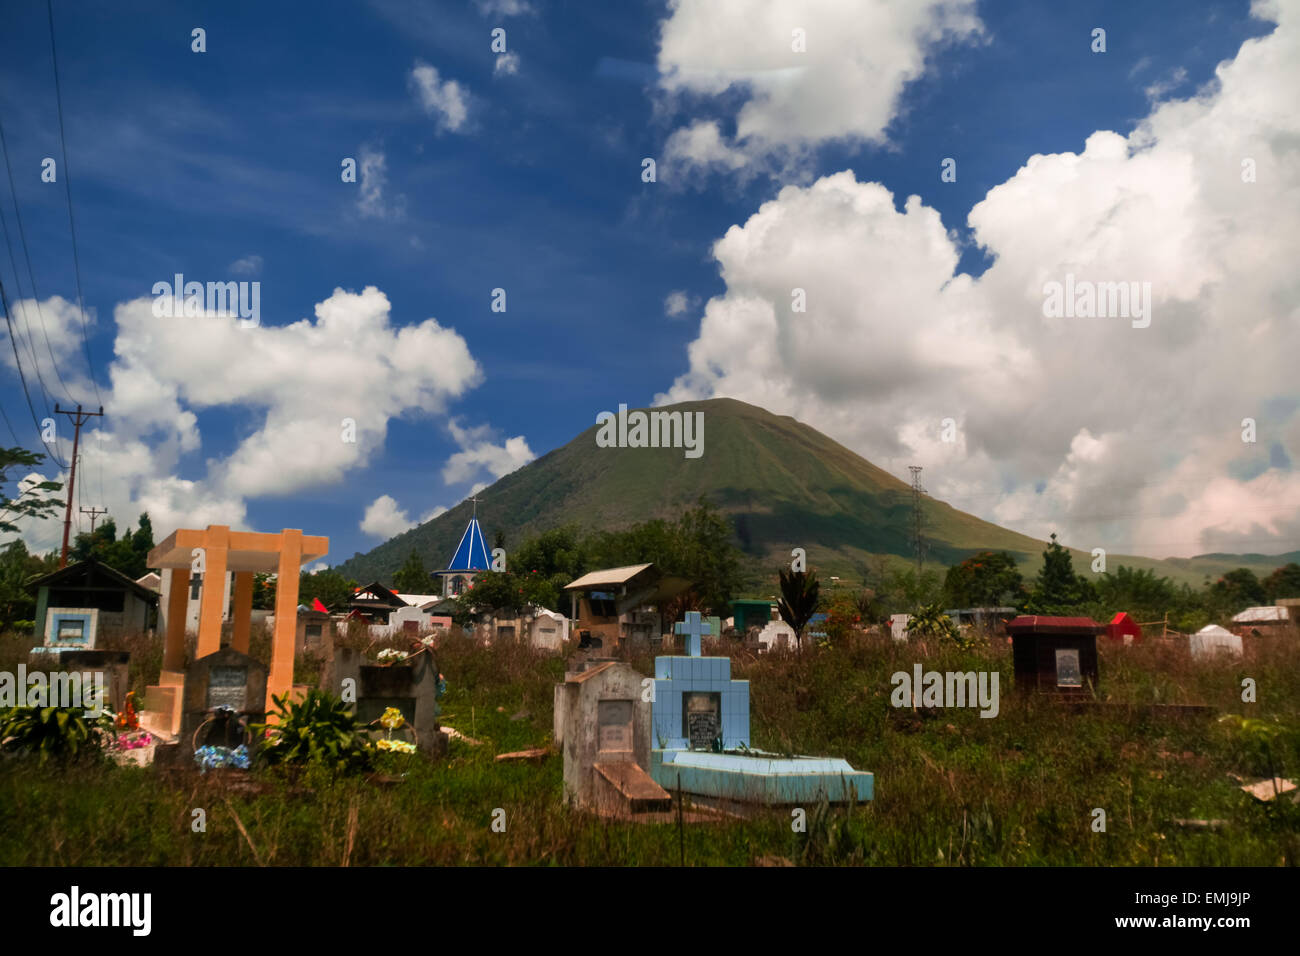 A rural cemetery in a background of Mount Lokon, an active volcano in Tomohon, North Sulawesi, Indonesia. Stock Photo